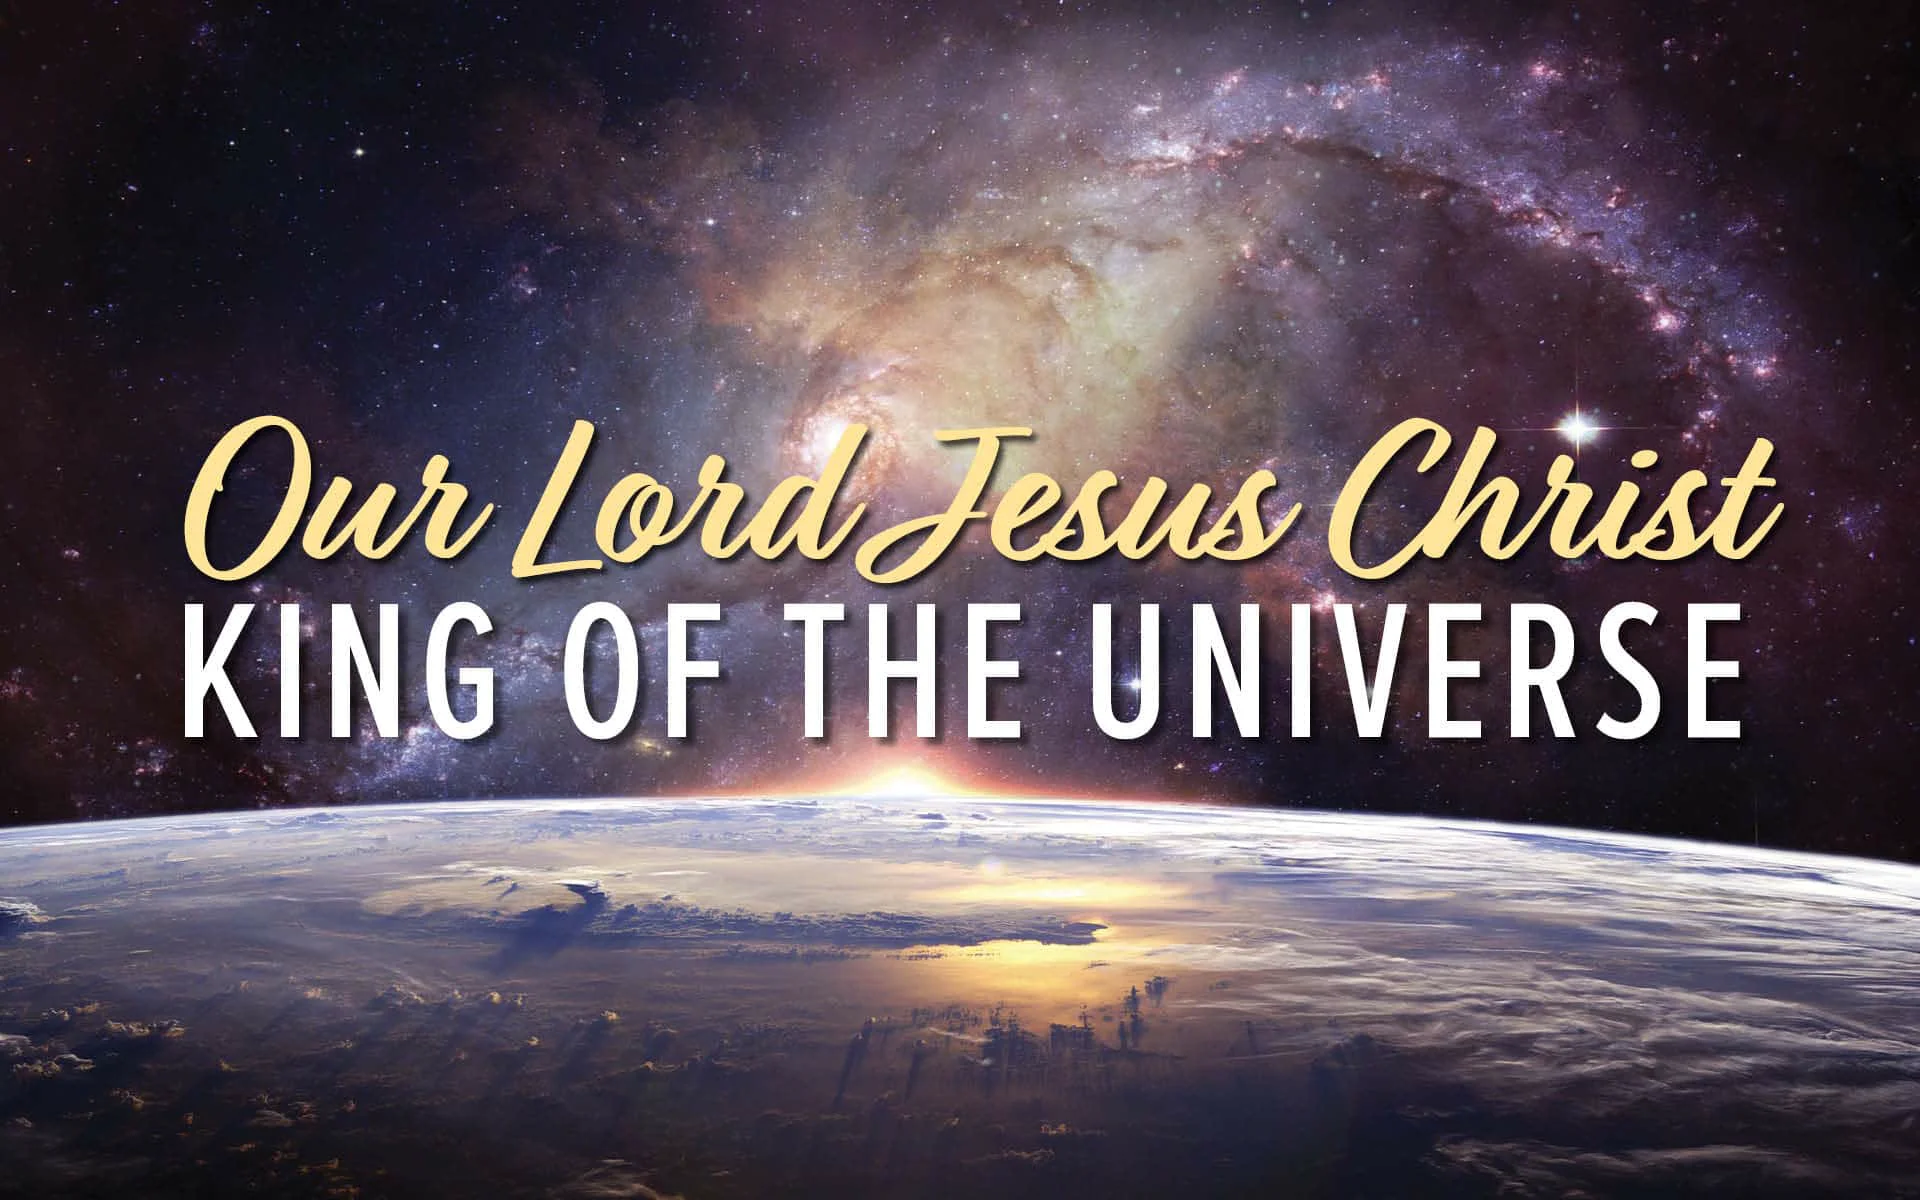 My Kingdom is Not of This World INTRO (The Solemnity of Our Lord Jesus  Christ, King of the Universe, Year B) on Vimeo